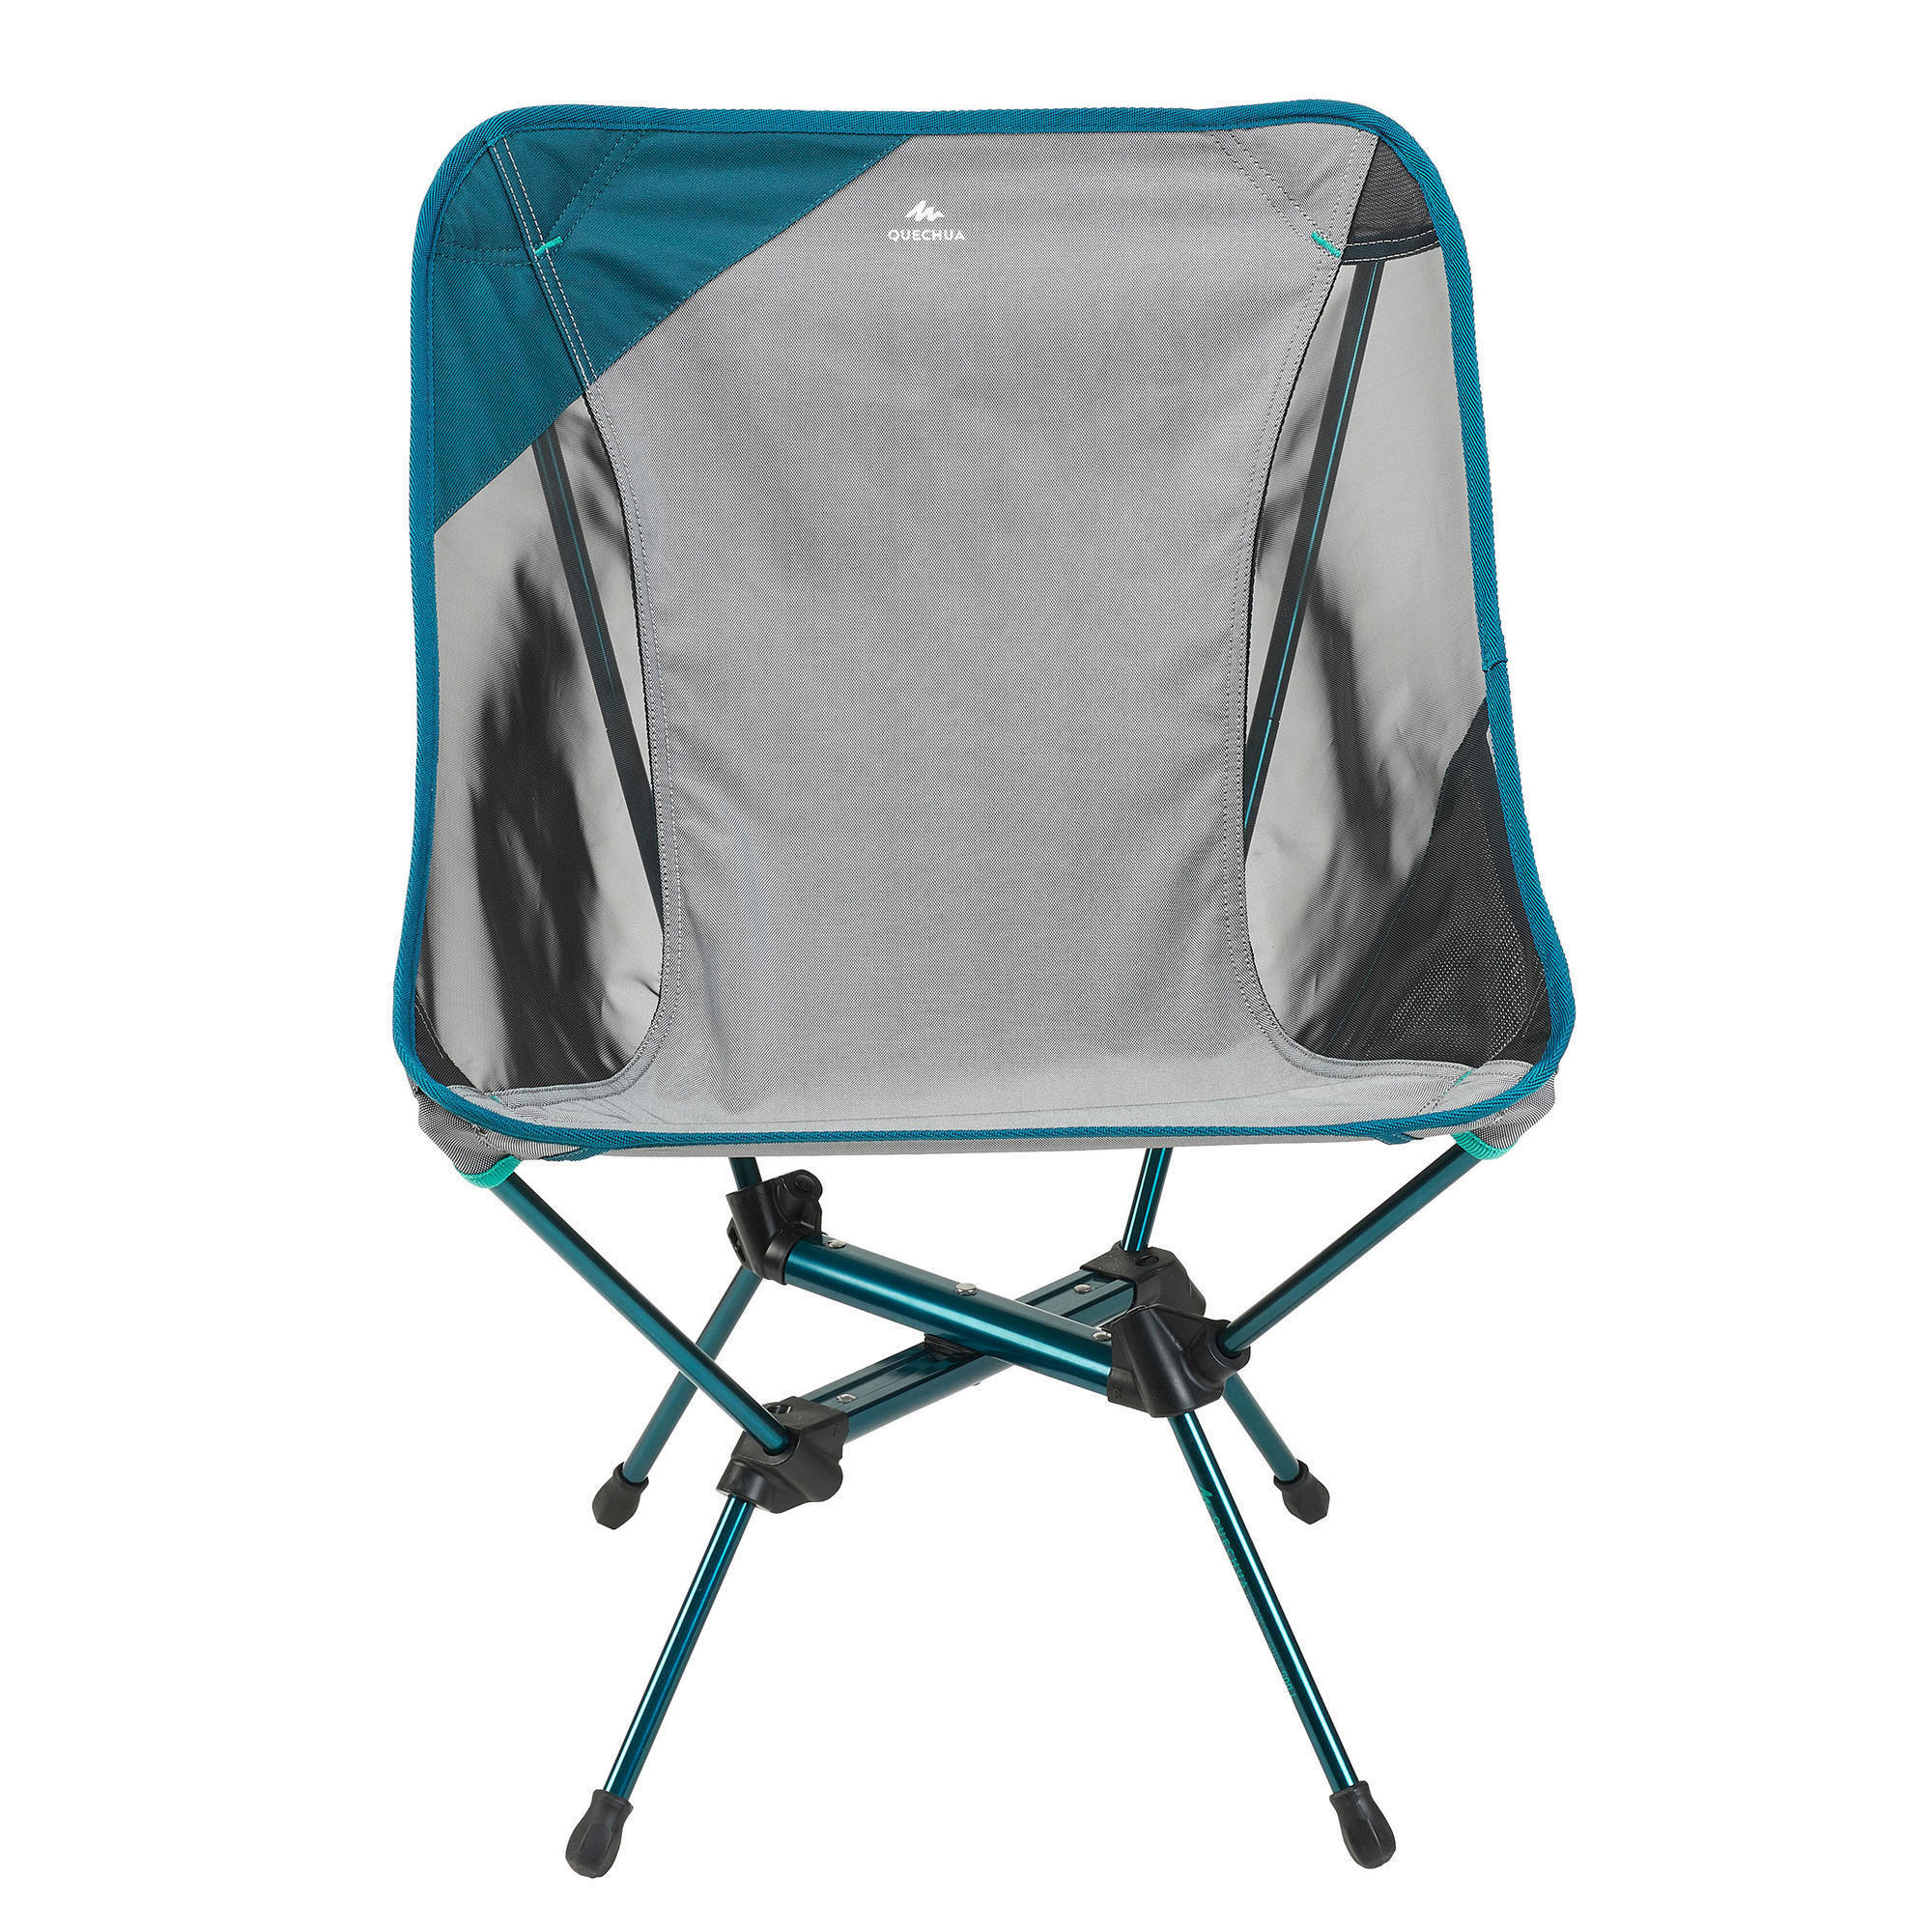 FOLDING CAMPING CHAIR MH500 - GREY 8/15